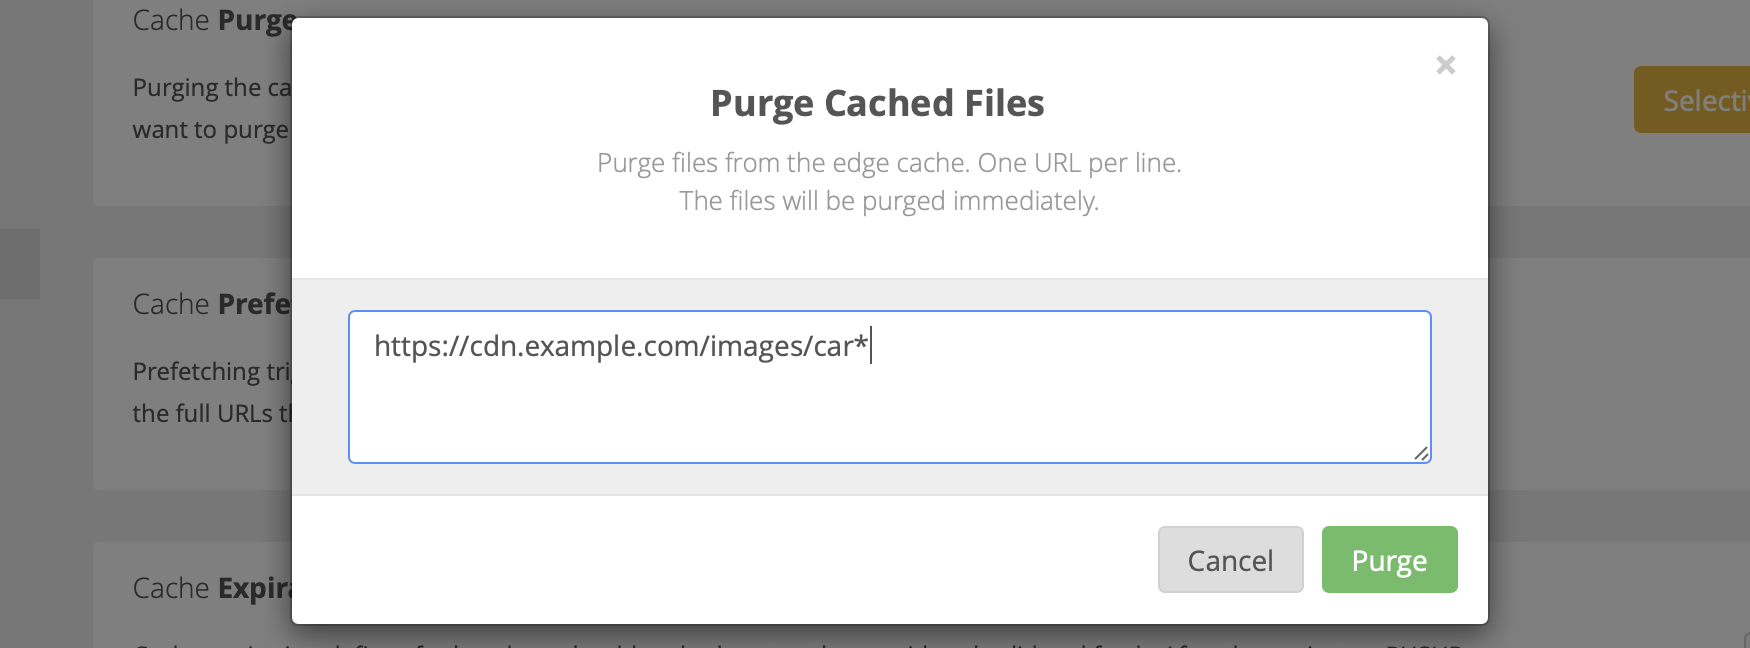 Wildcard purge by name from CDN cache